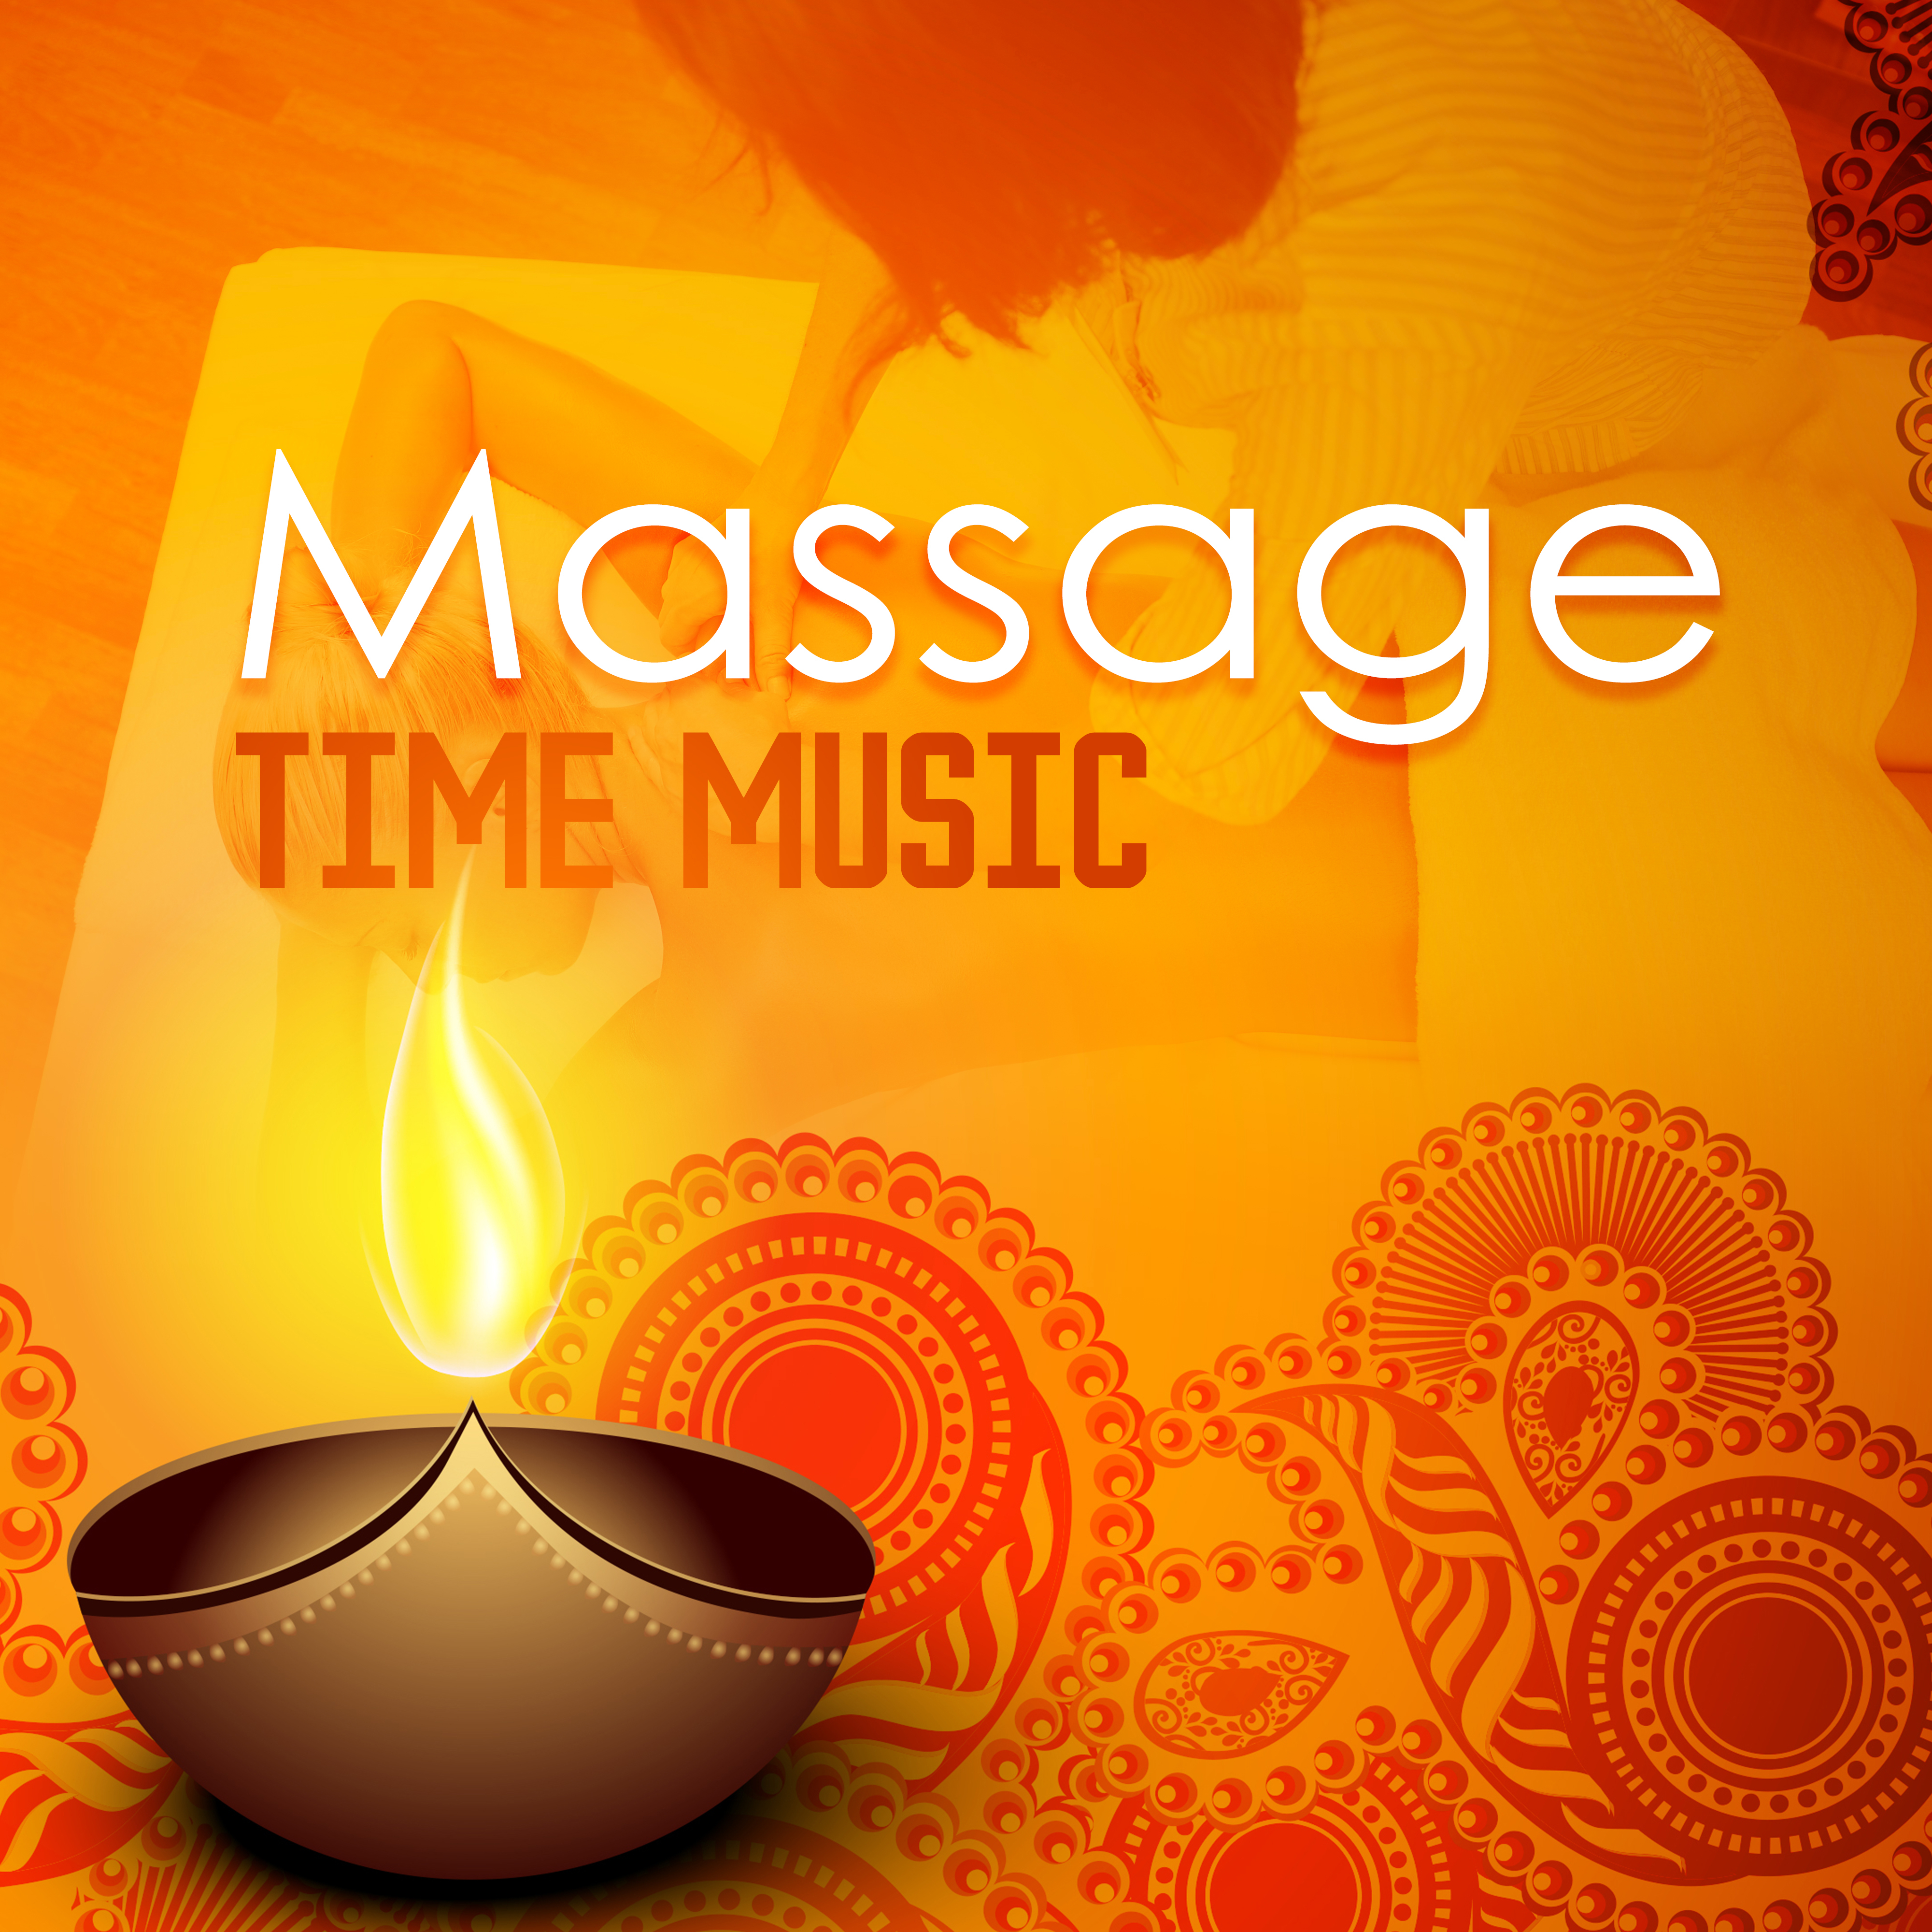 Massage Time Music  Spa Relaxation, Deep Relaxation, Wellness